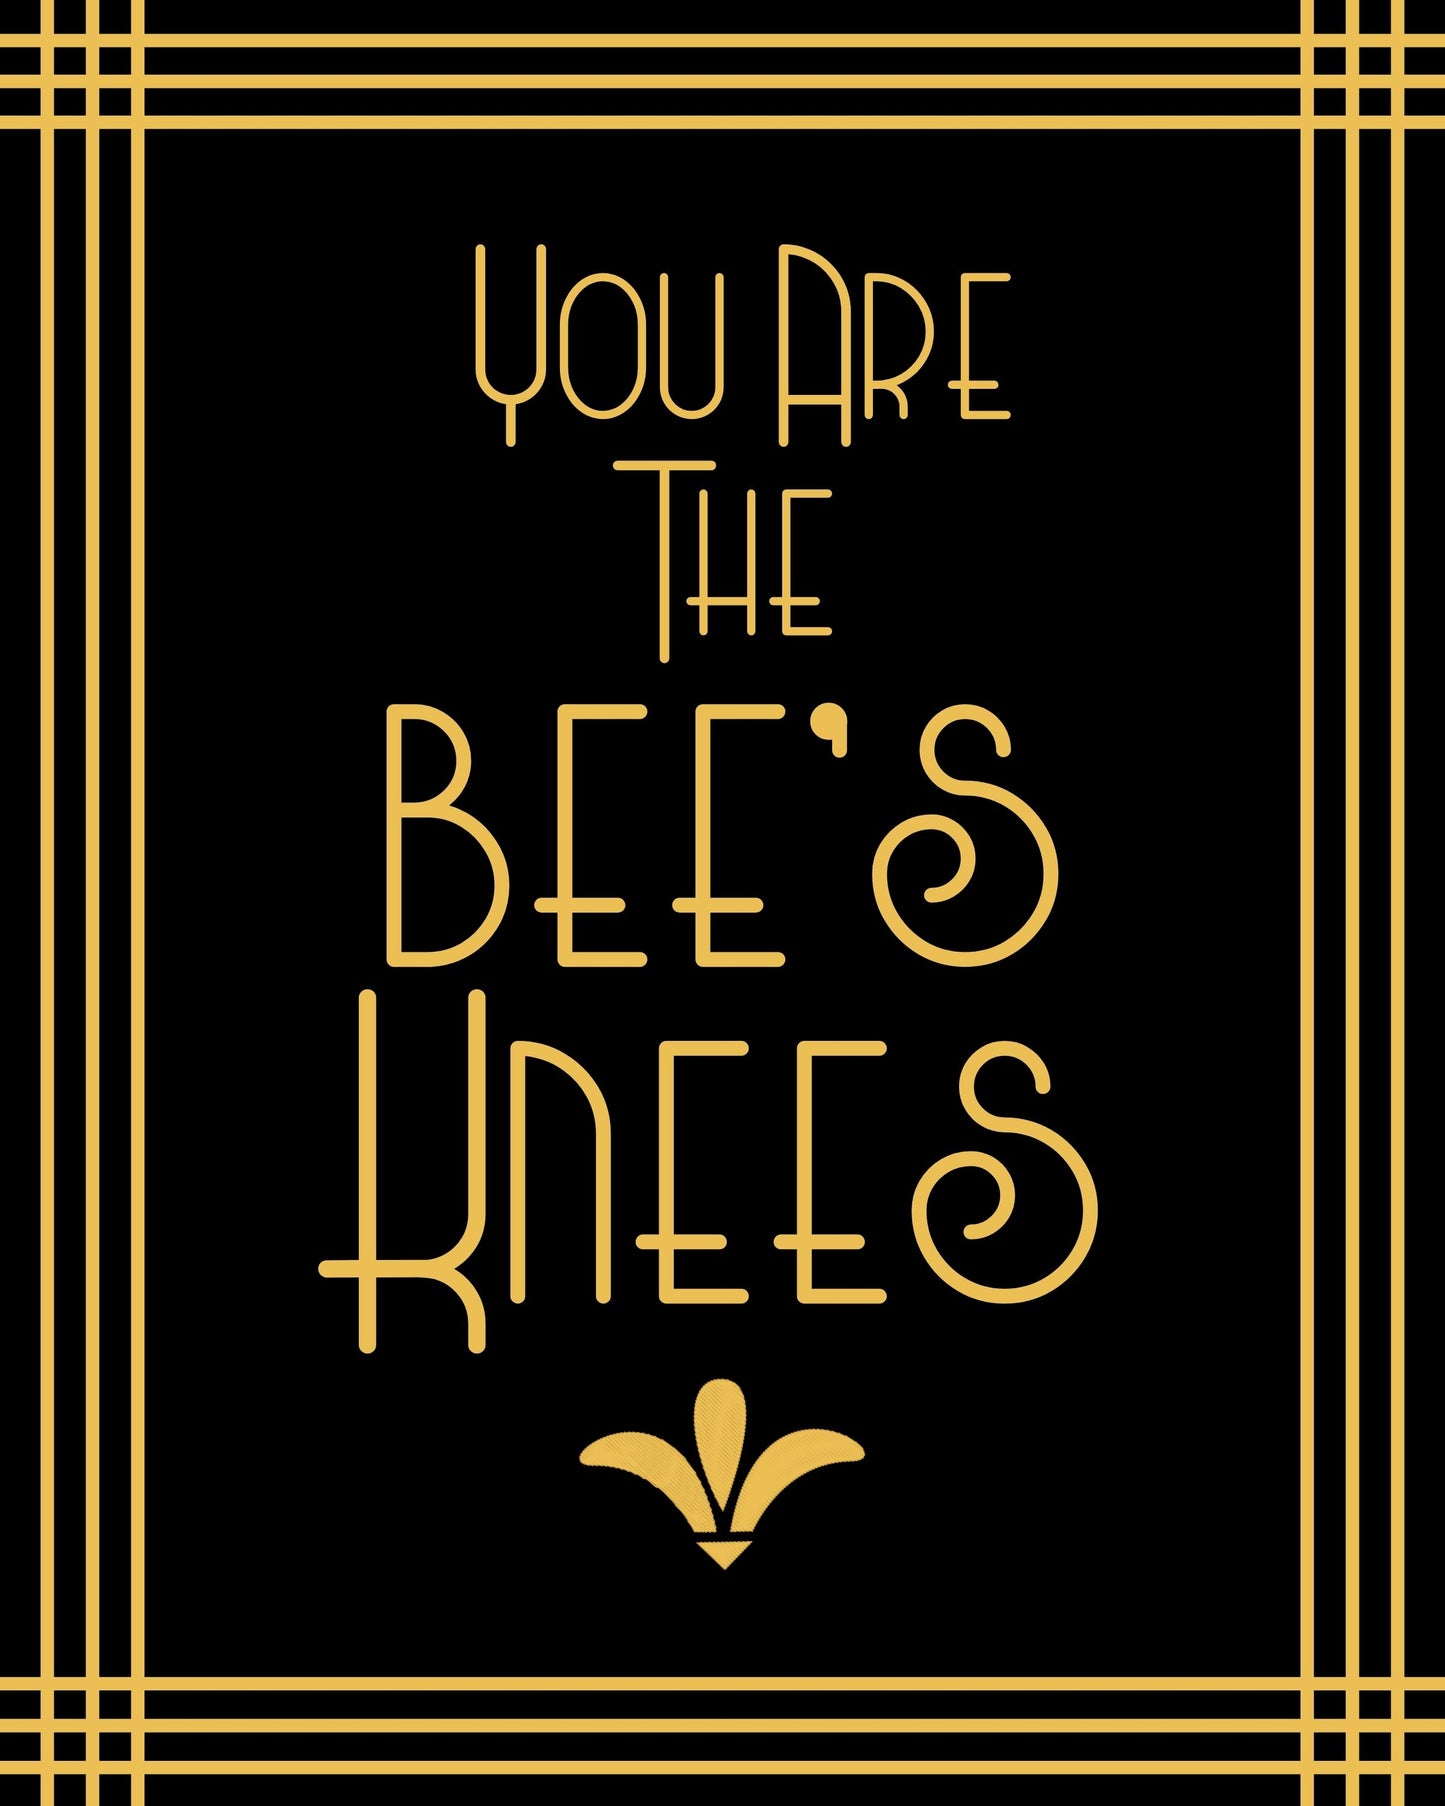 "You Are The Bee's Knees" Printable Party Sign For Great Gatsby or Roaring 20's Party Or Wedding, Black & Gold, Printable Party Decor